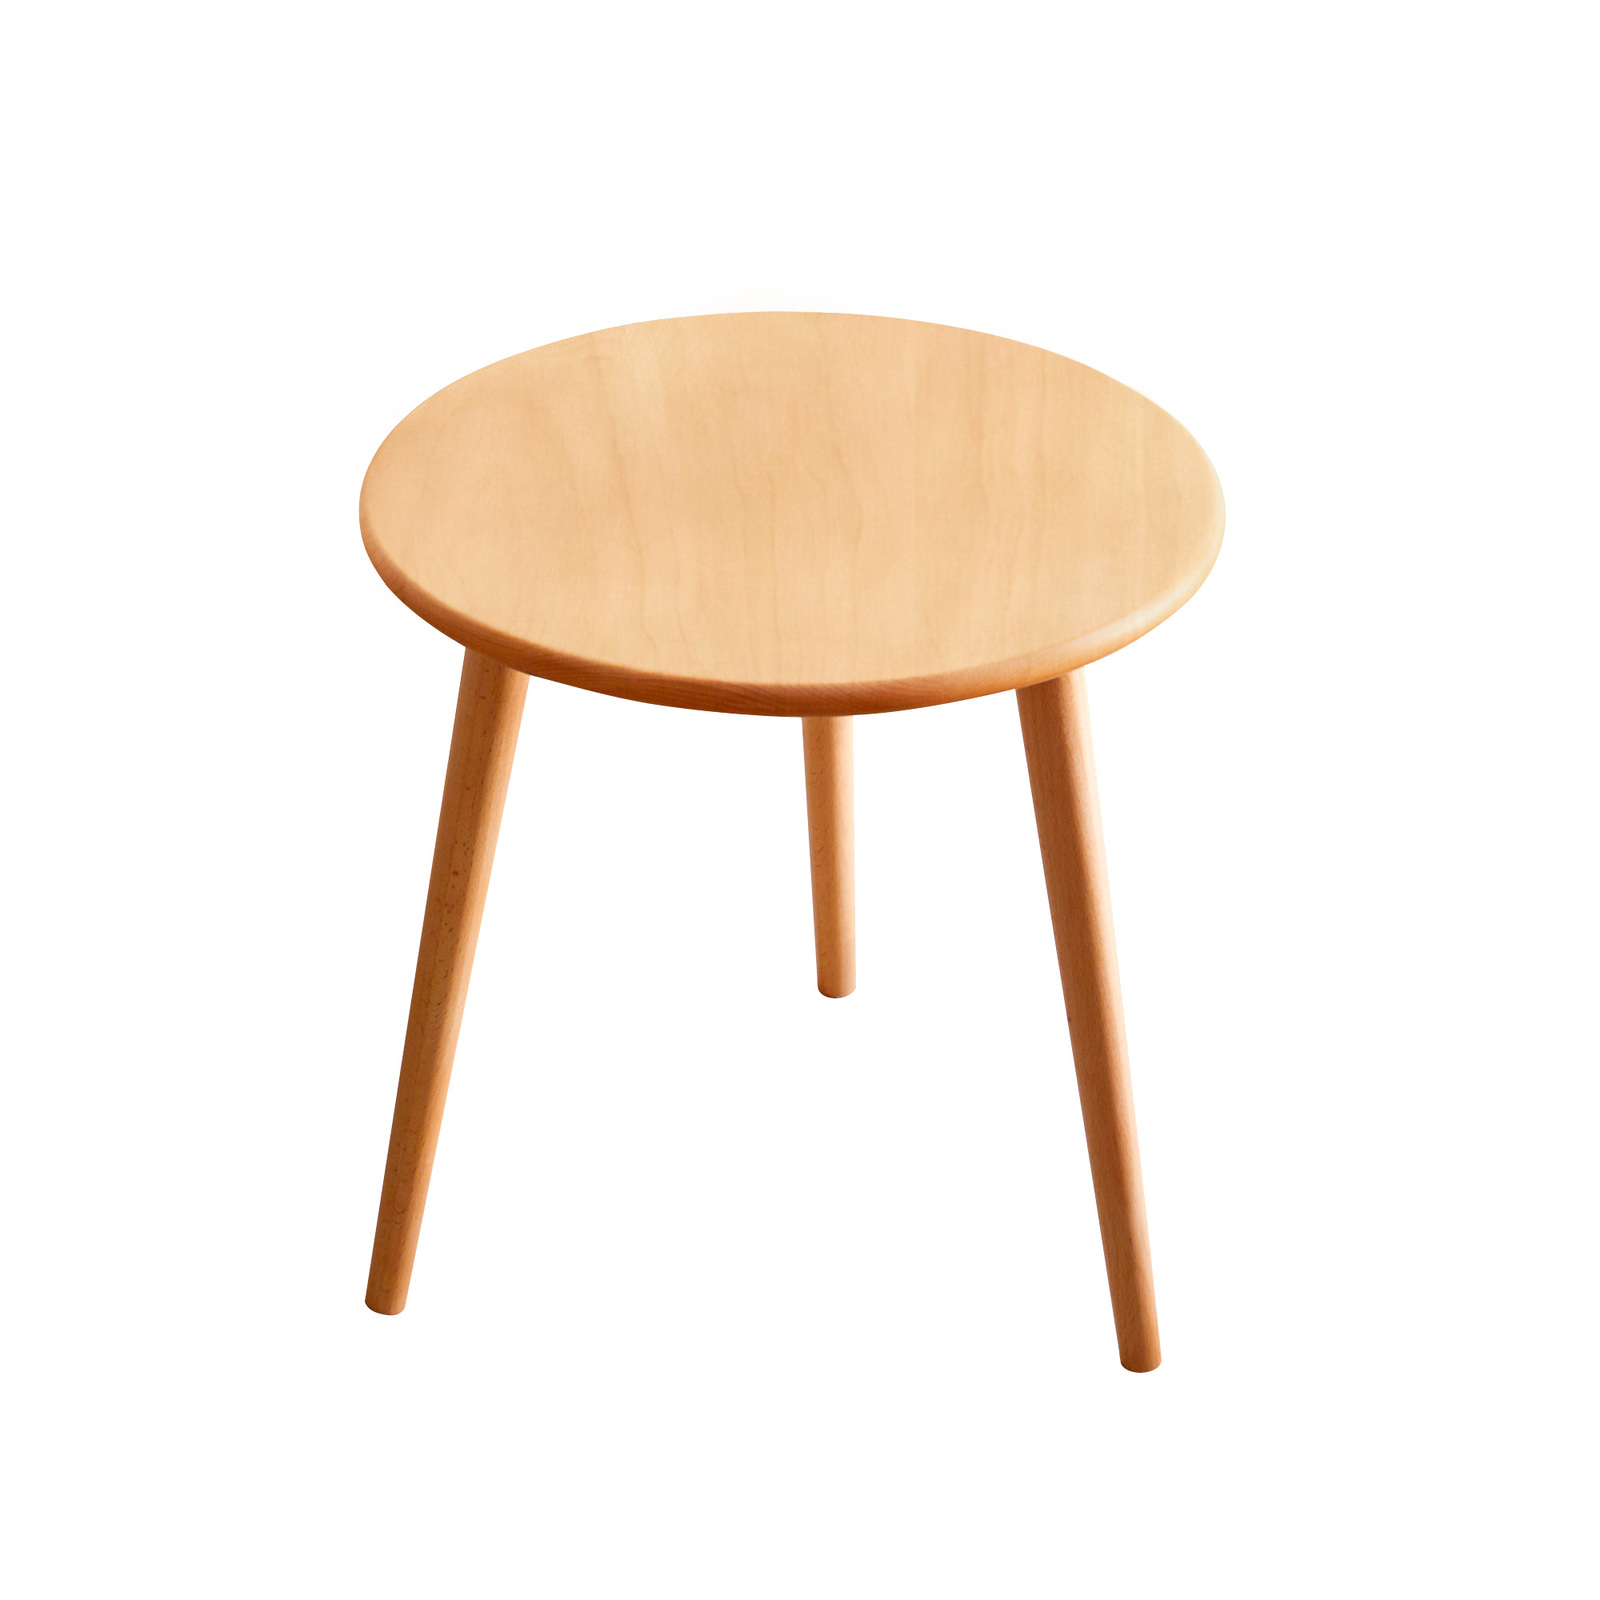 Round Table Small Coffee End Tables for Living Room 40cm Beech Wood